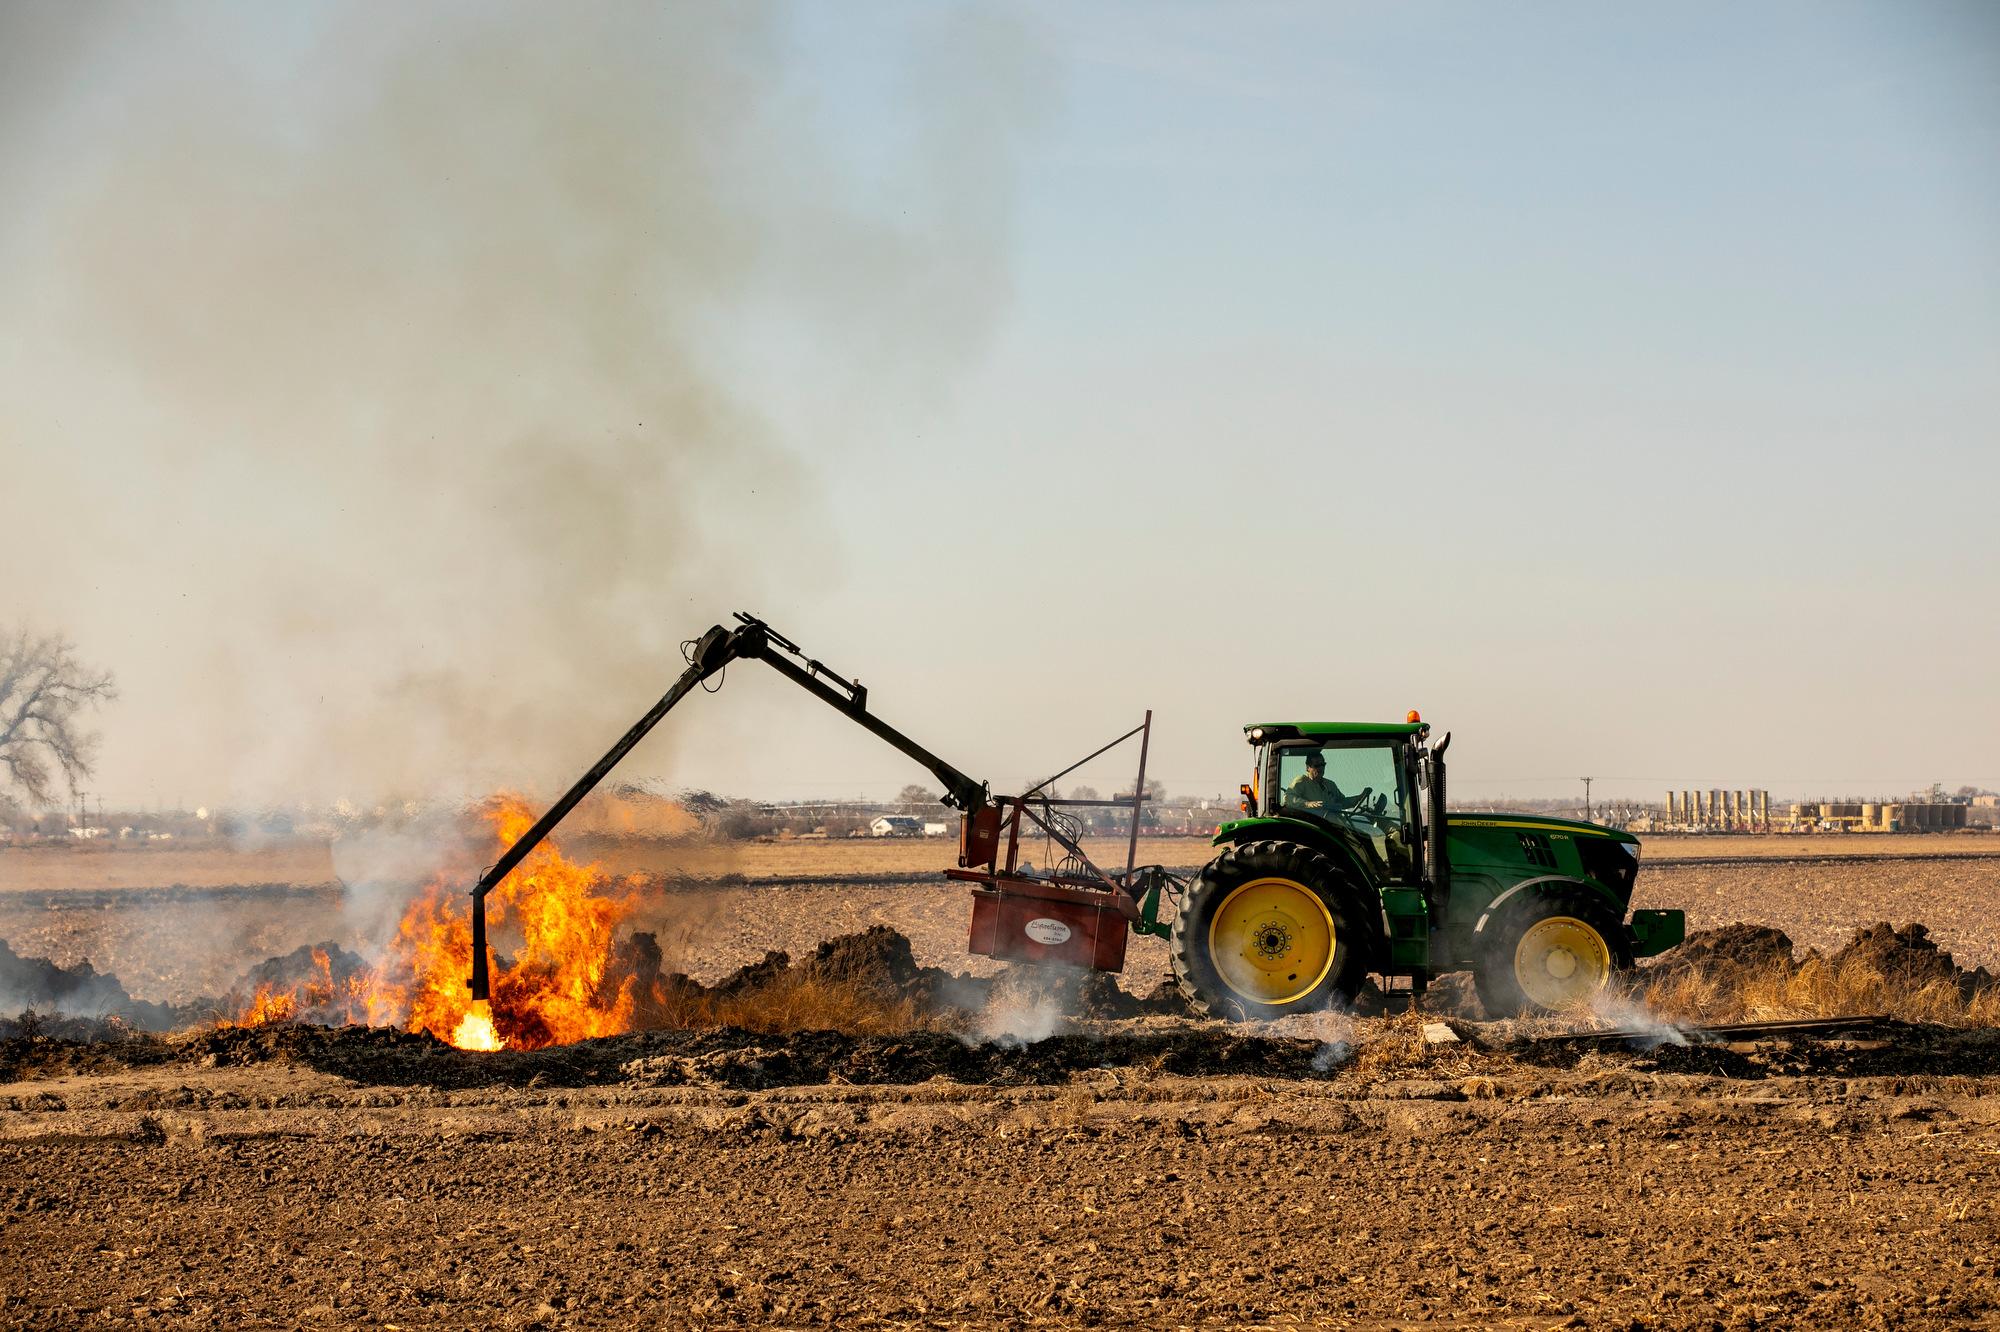 210305-DITCH-BURNING-IRRIGATION-WATER-DROUGHT-FARM-AGRICULTURE-WELD-COUNTY